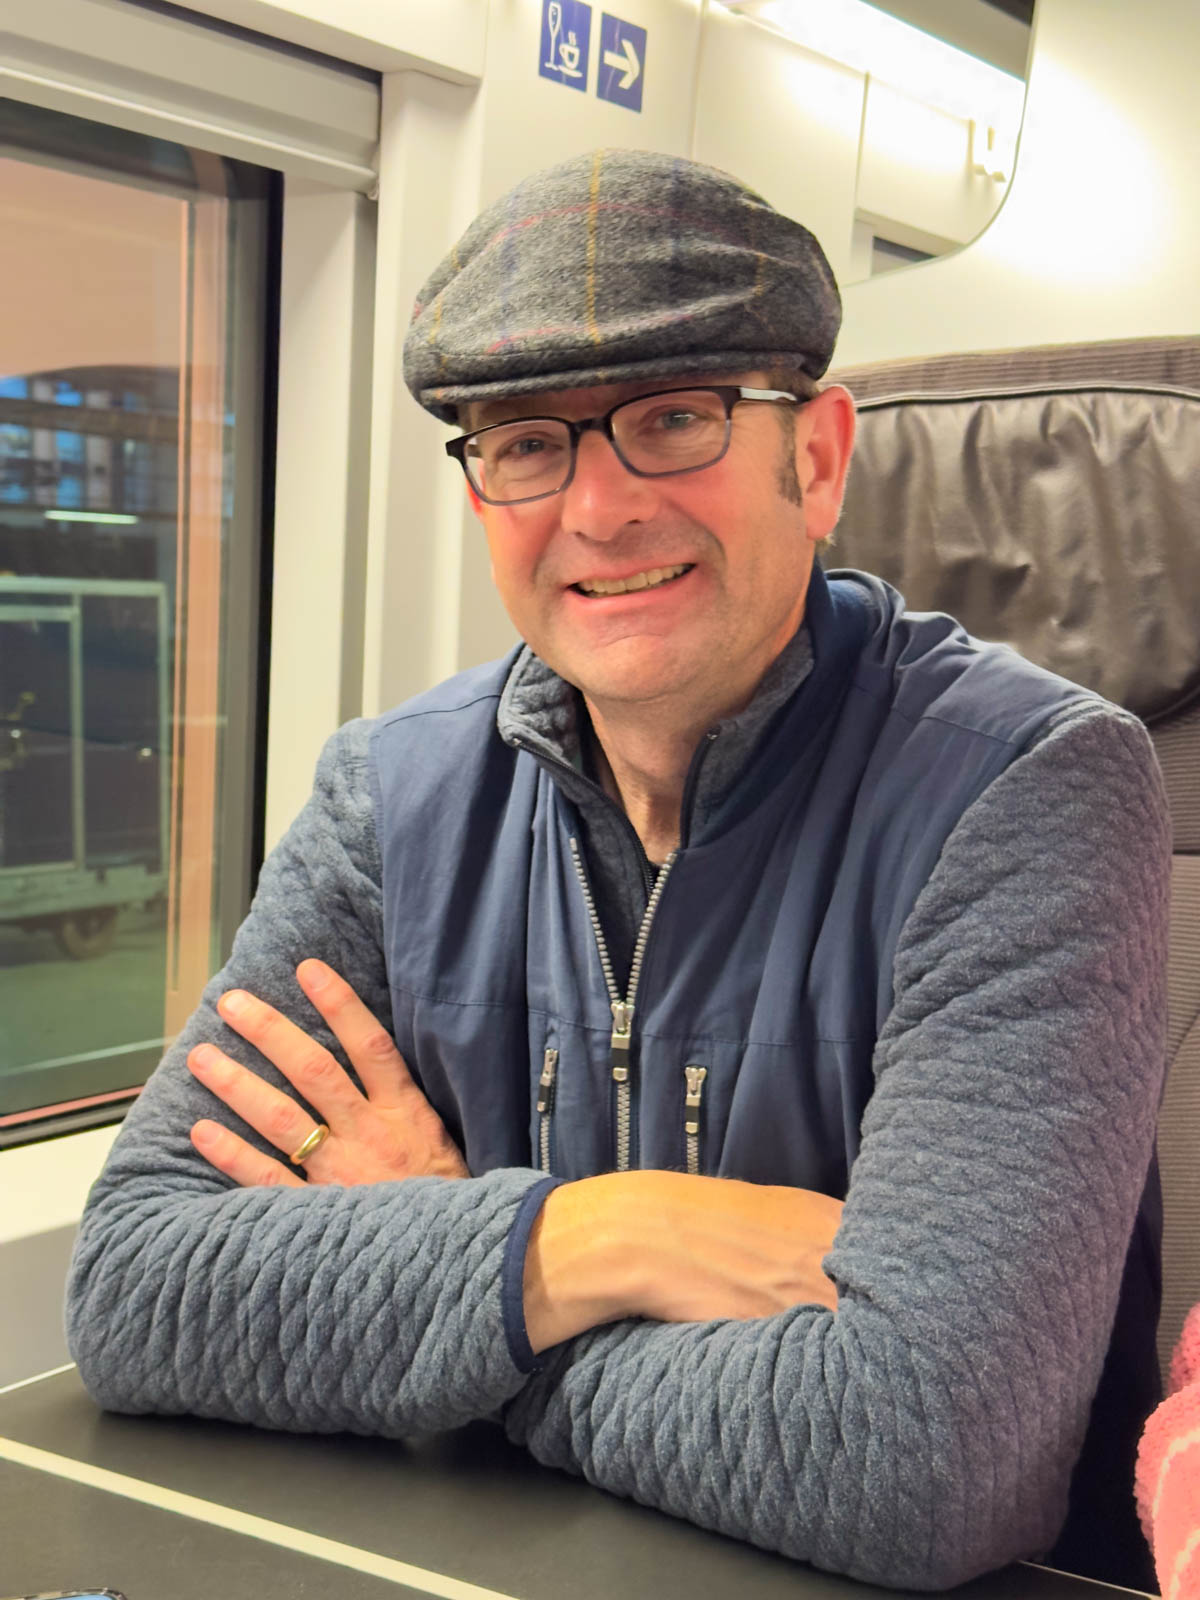 A man in a cap on the train.